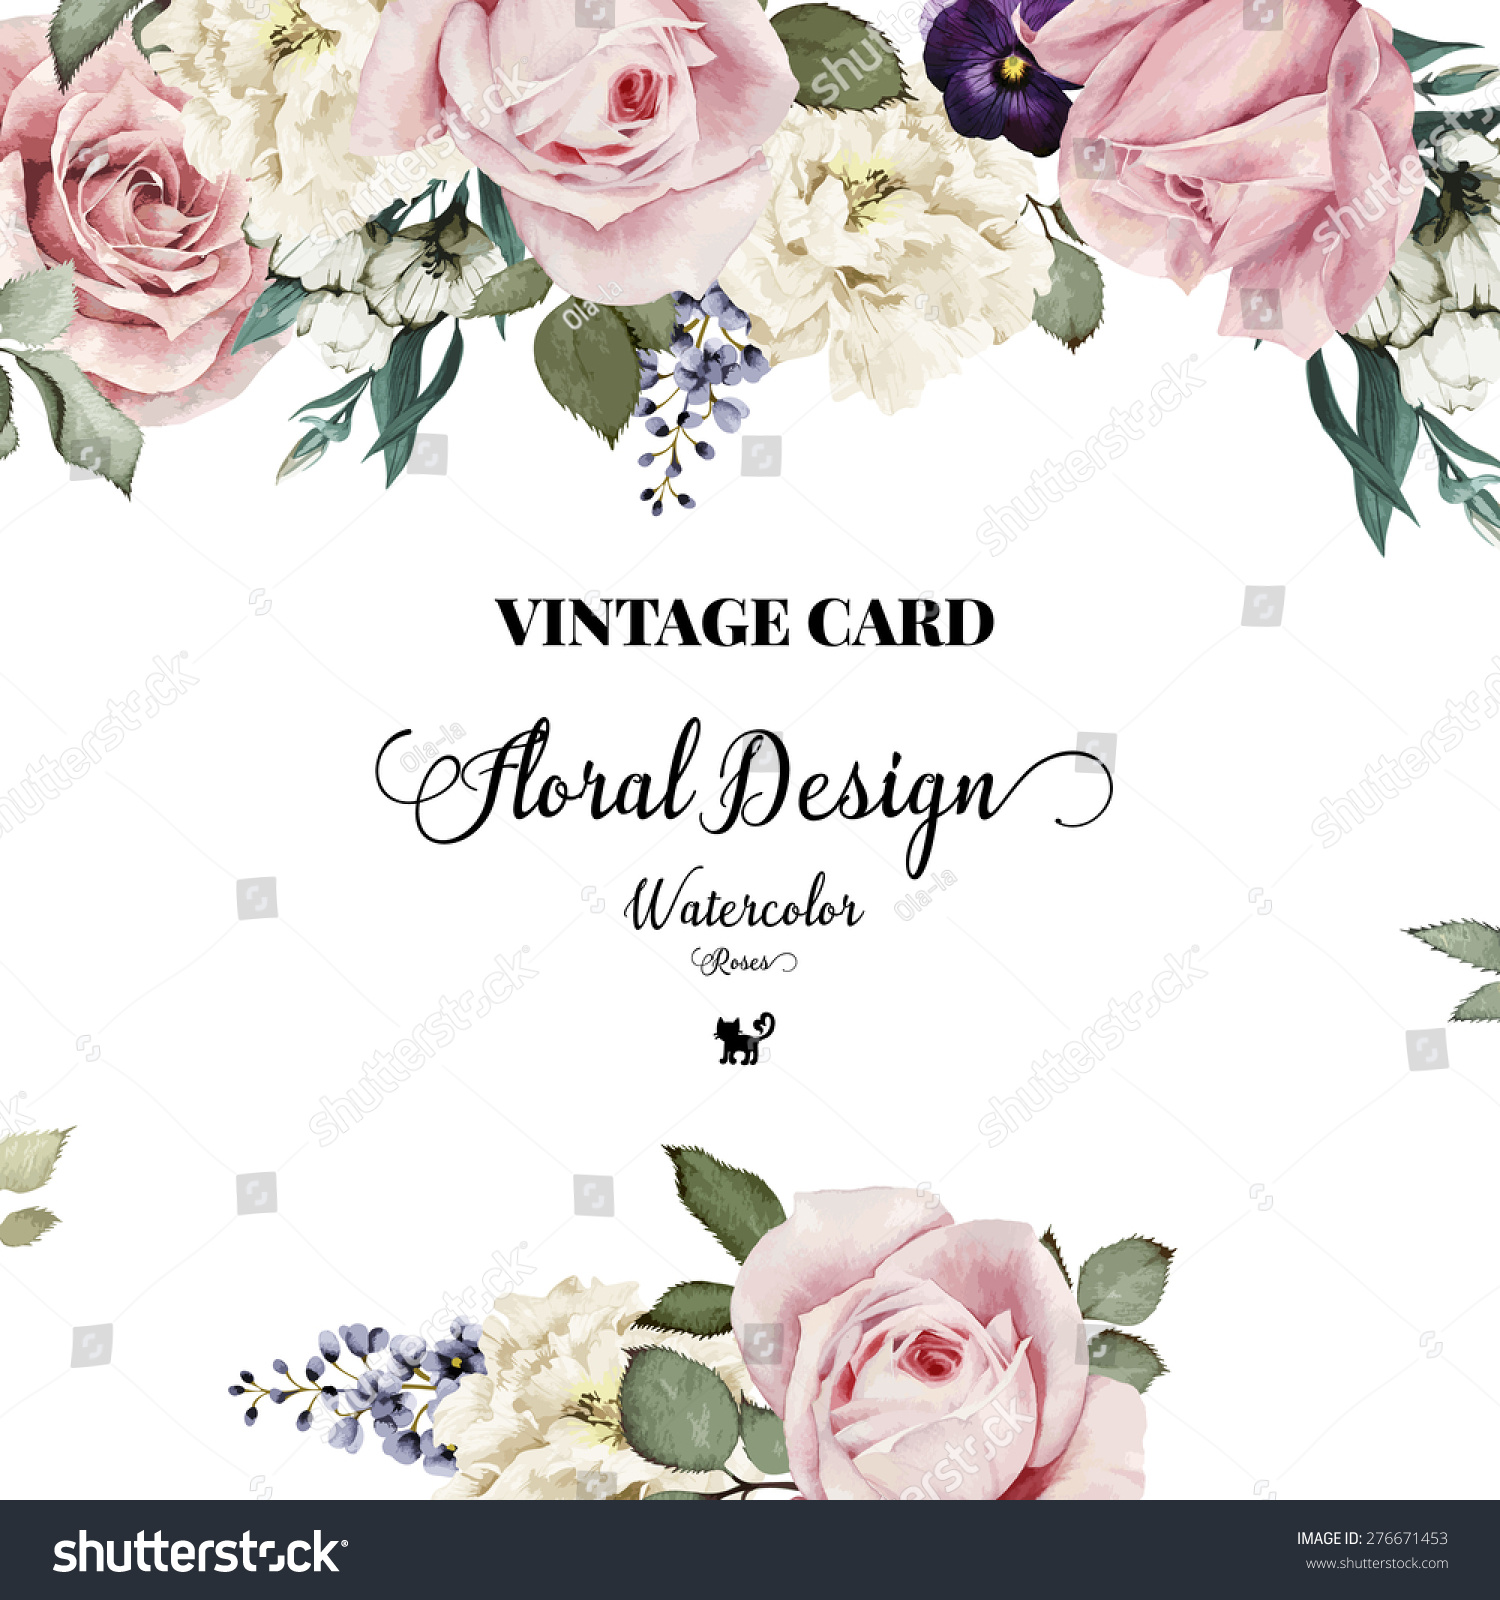 Card used for wedding invitations